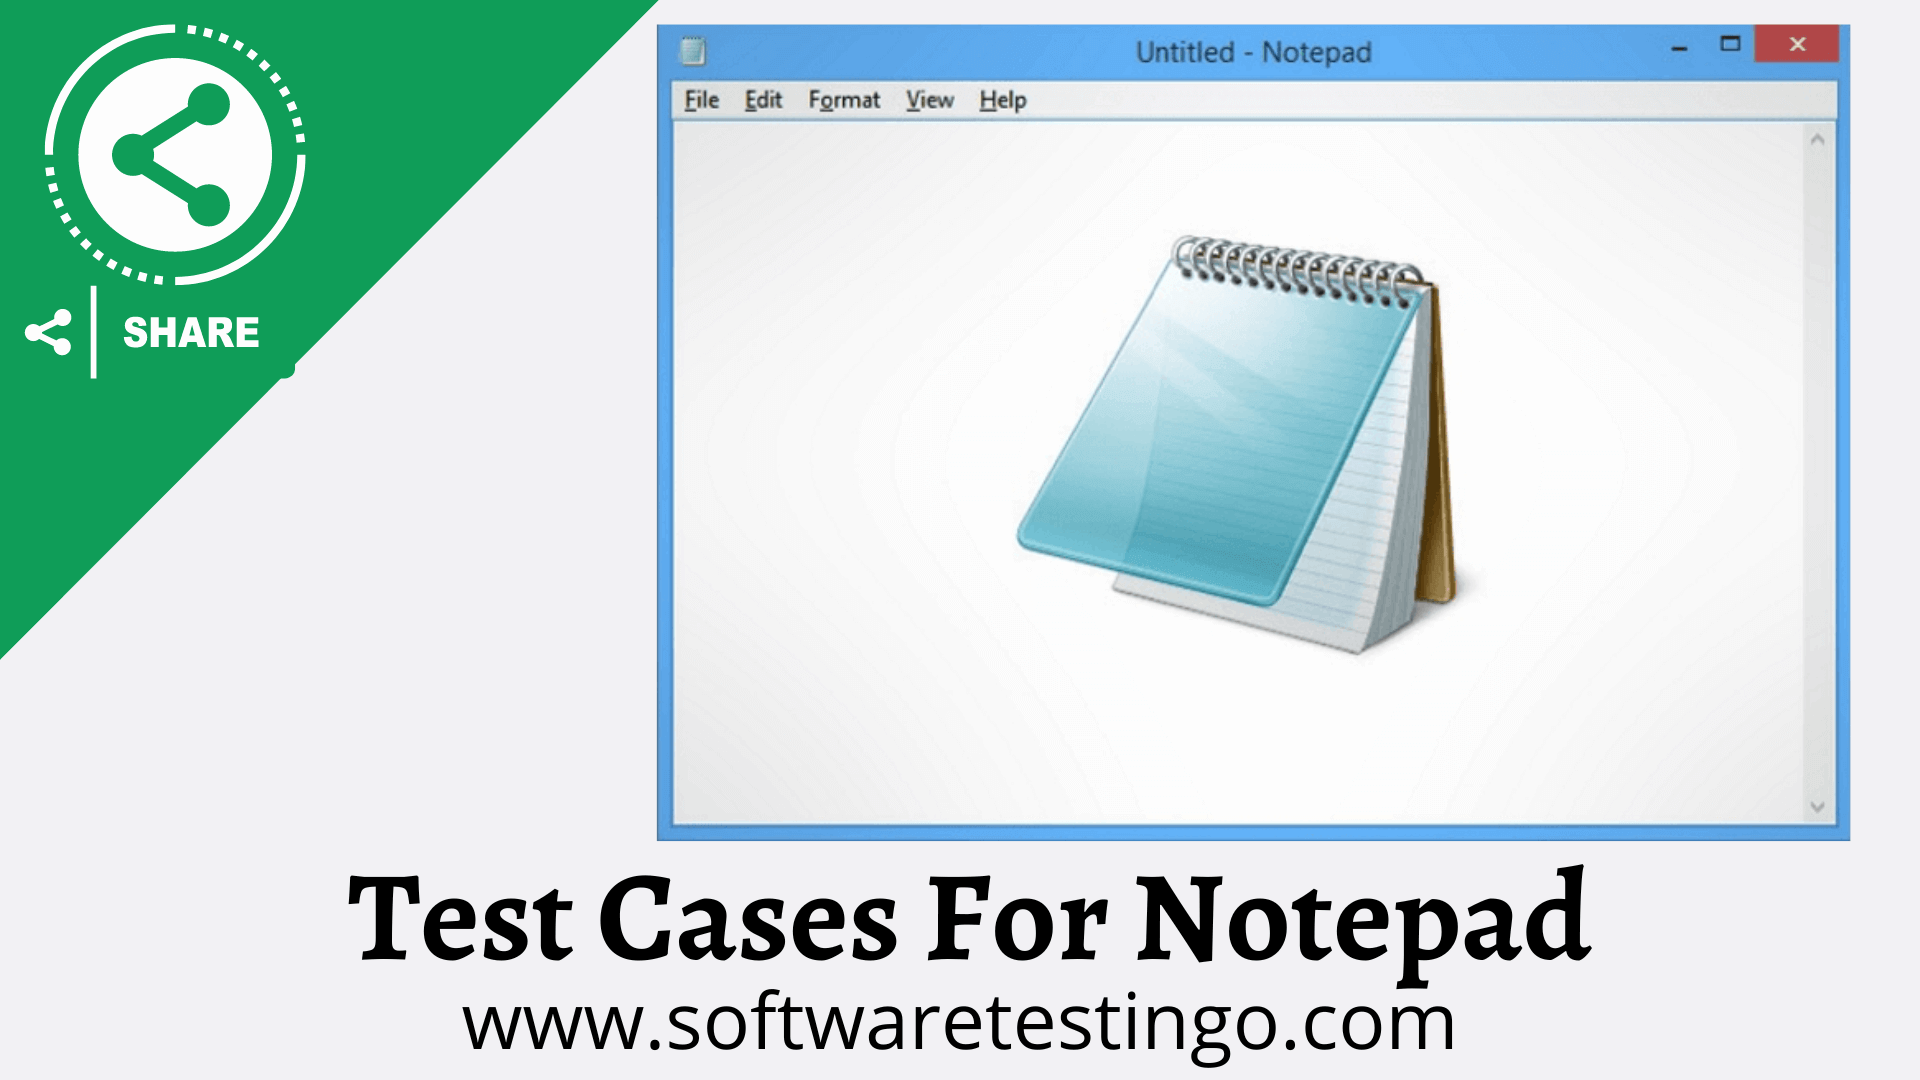 Test Cases For Notepad